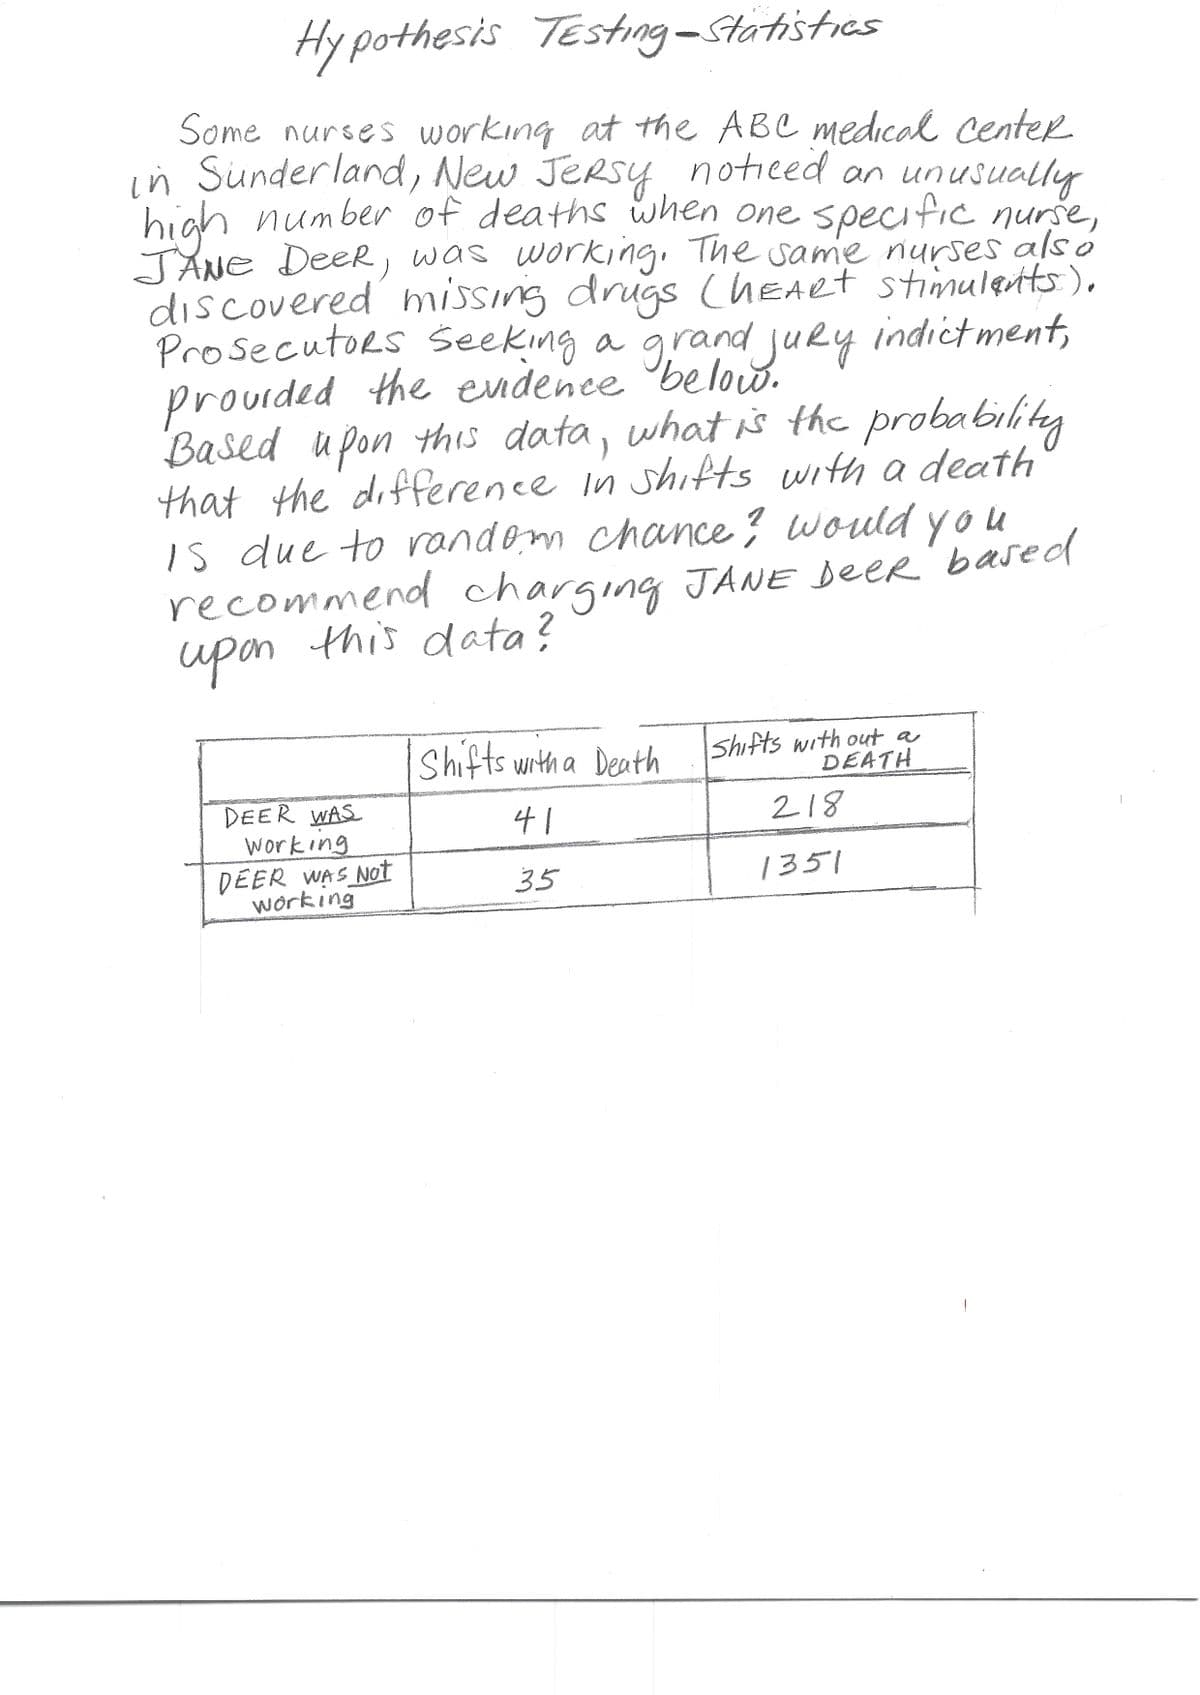 Hypothesis Testing - Statistics
Some nurses working at the ABC medical center
in Sunderland, New Jersy noticed an unusually
high number of deaths when one specific nurse,
JANE Deer, was working. The same nurses also
discovered missing drugs (hEARt stimulants).
Prosecutors seeking a grand juRy indictment,
provided the evidence below.
Based upon this data, what is the probability
that the difference in shifts with a death
is due to random chance? would you
recommend charging JANE DeeR based
upon this data?
DEER WAS
Working
DEER WAS NOT
working
Shifts with a Death
41
35
Shifts with out a
DEATH
218
1351
1